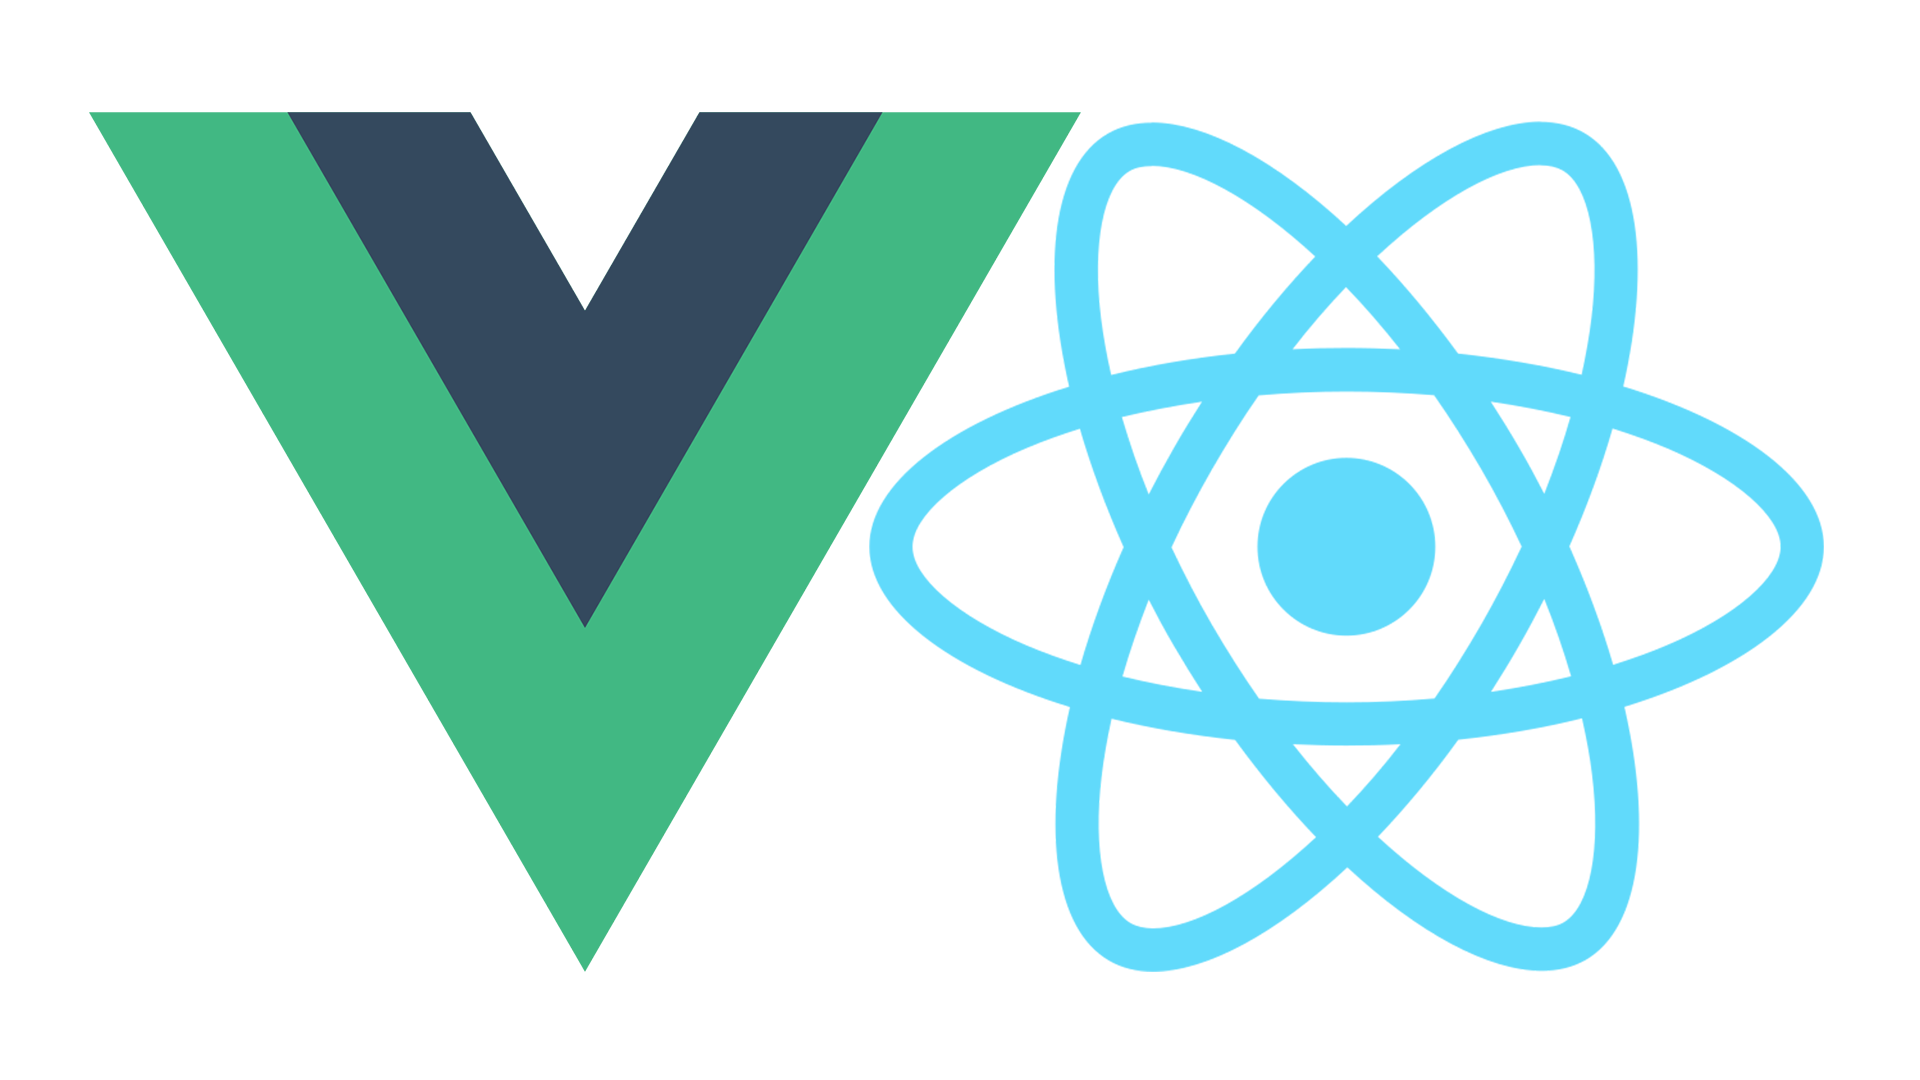 Vue & React logos NOT fighting each other